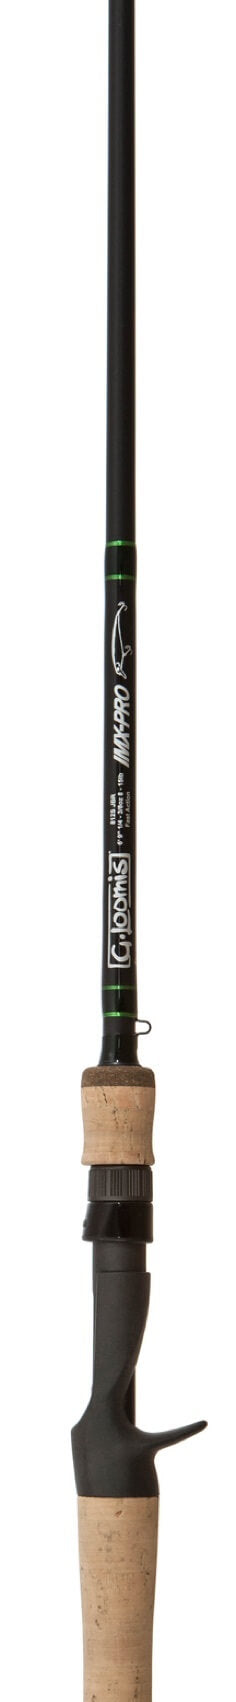 G Loomis 841S NRX+ Inshore Spinning Rod